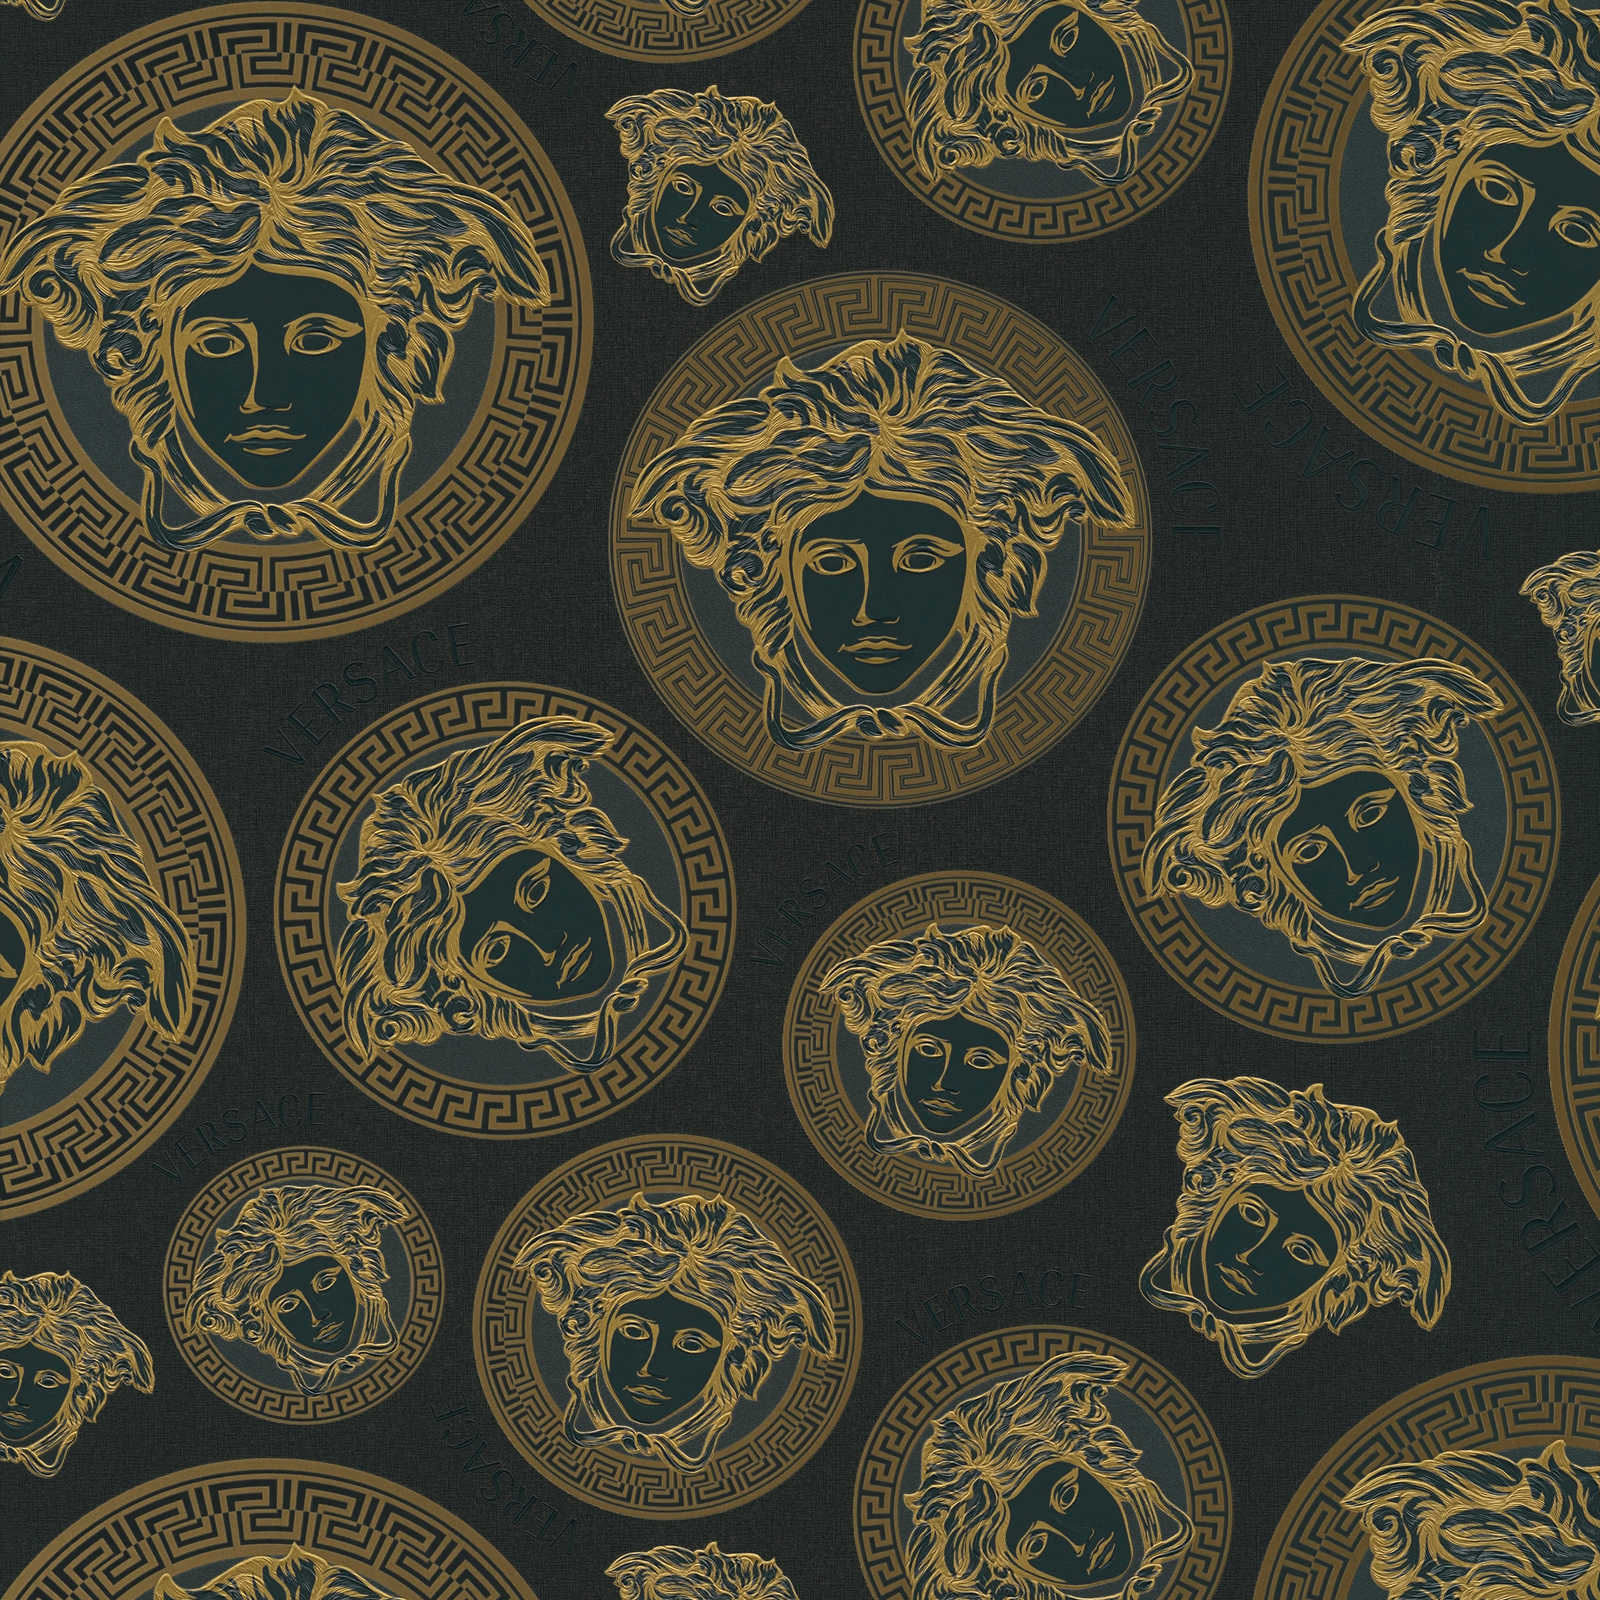         VERSACE wallpaper black and gold with Medusa motif
    